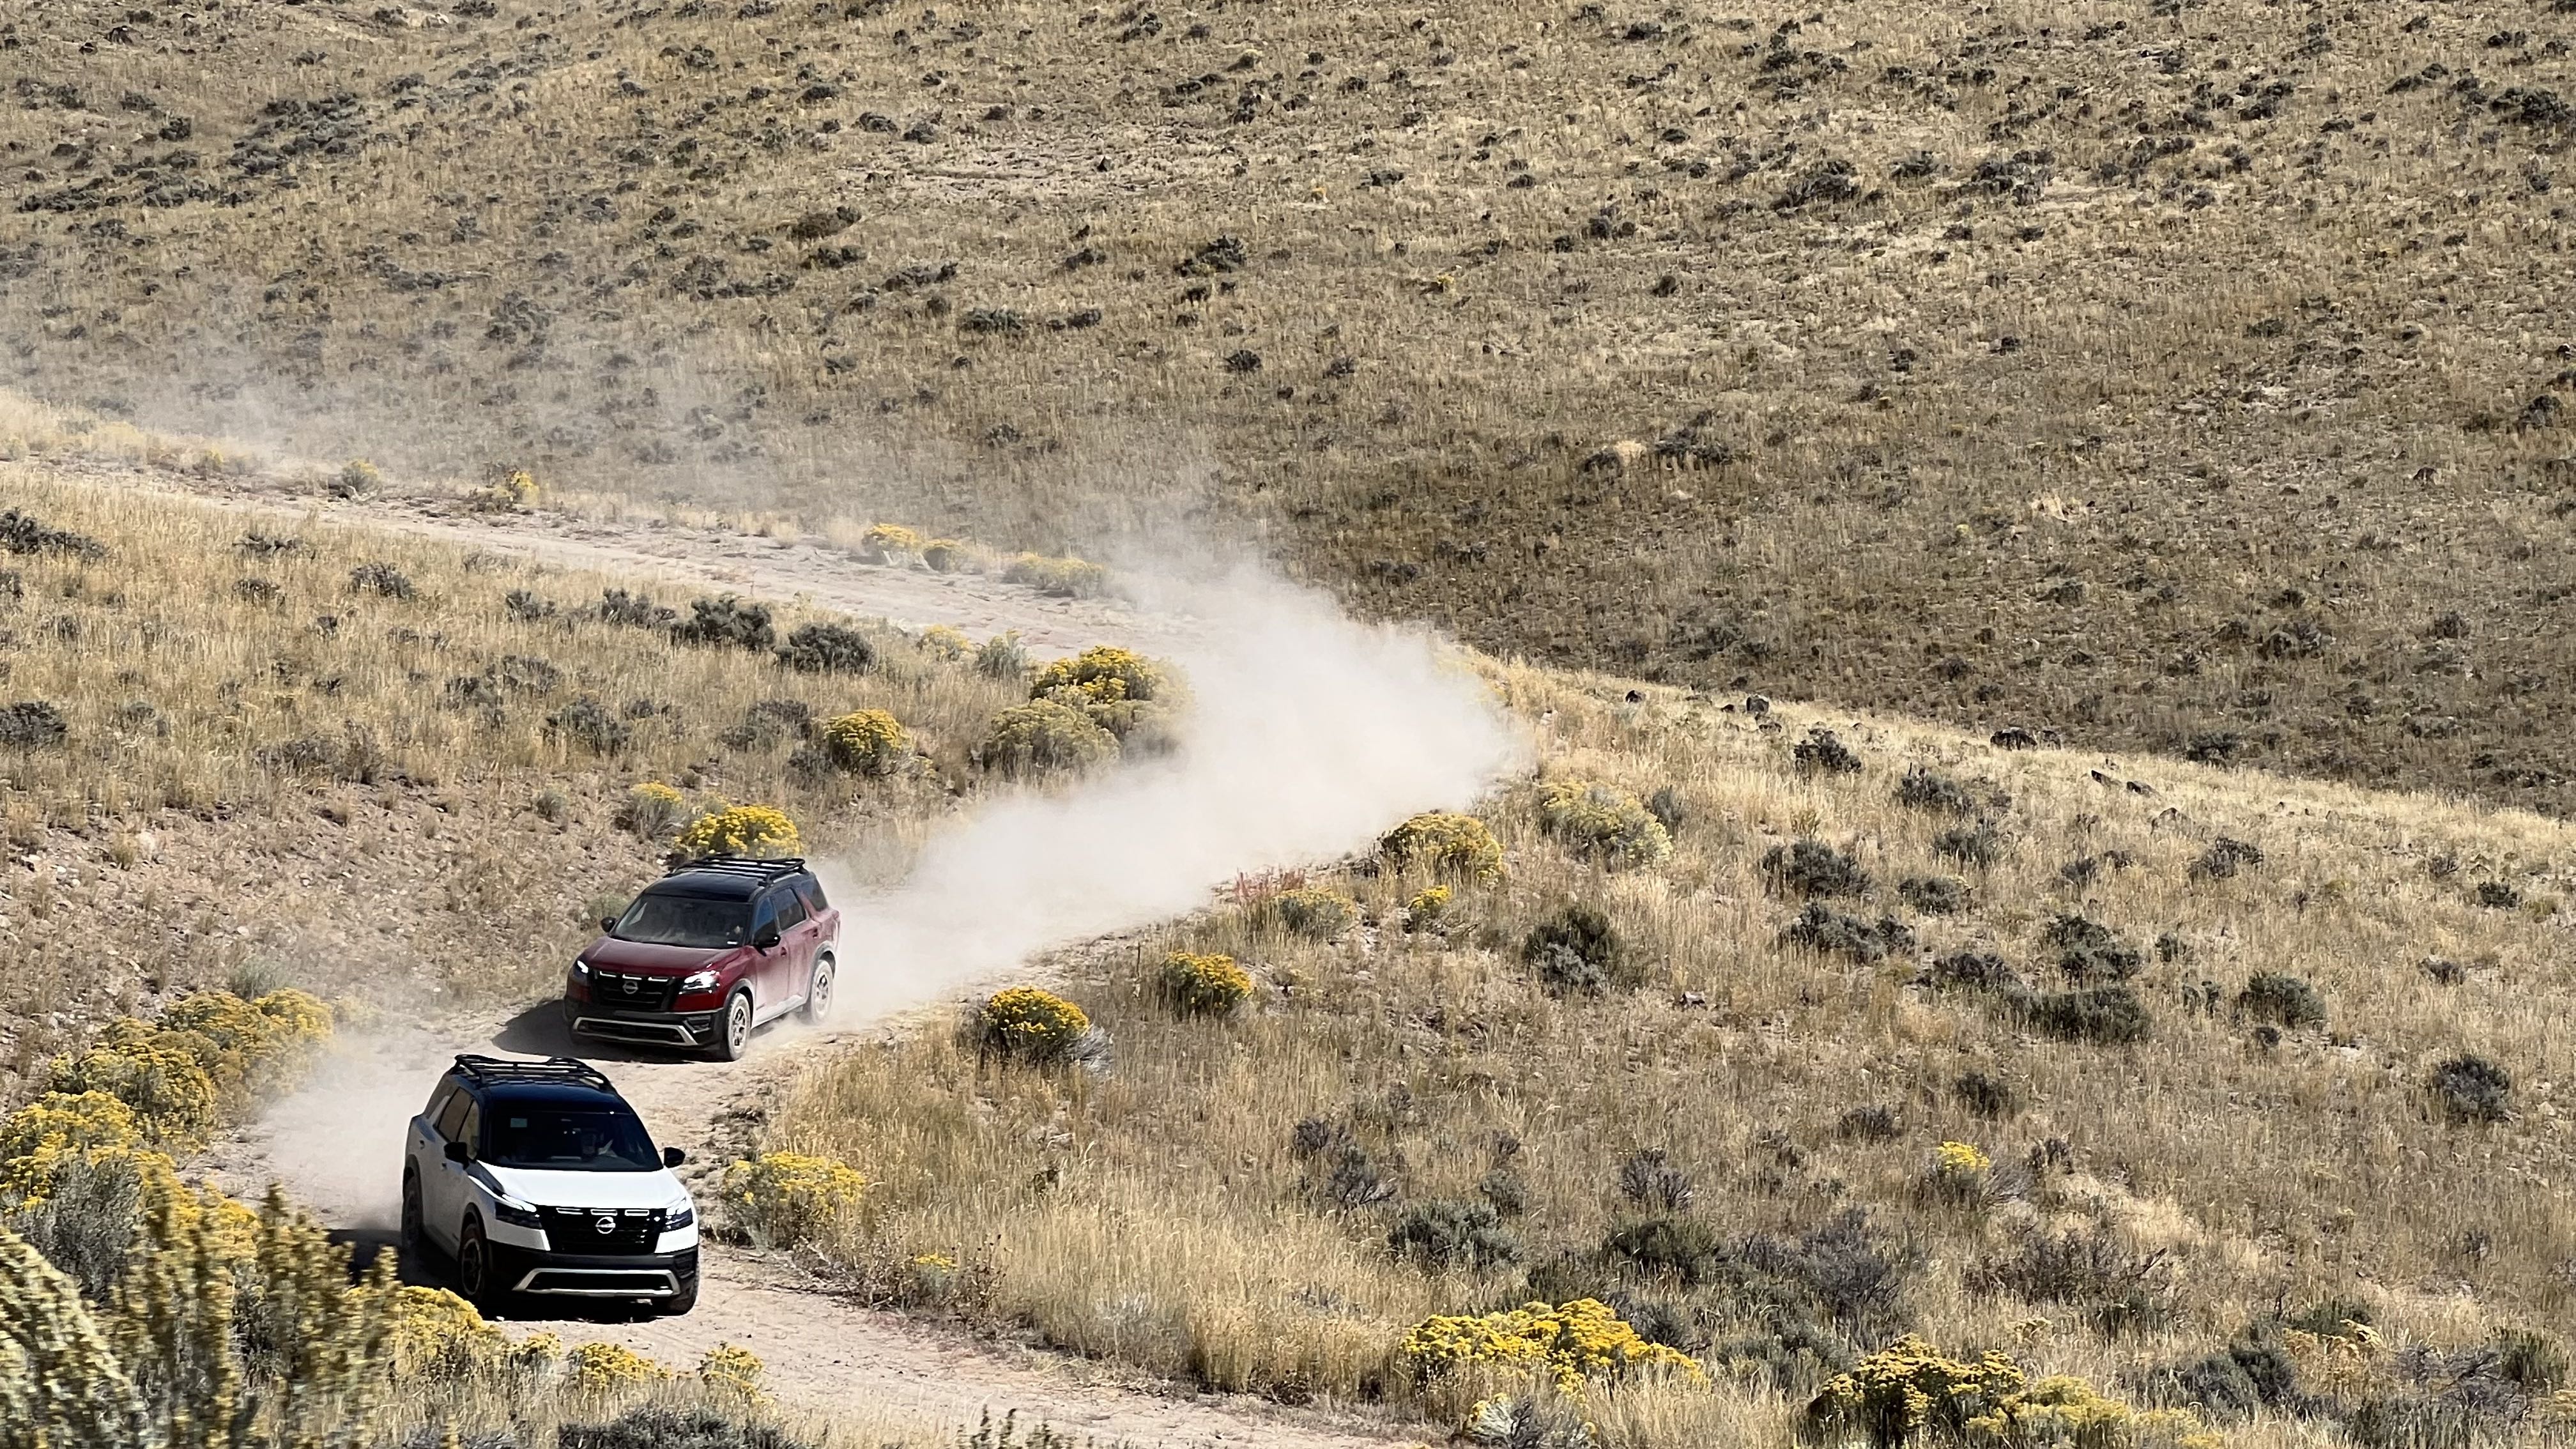 lots of dust off-roading with the Nissan Pathfinder Rock Creek